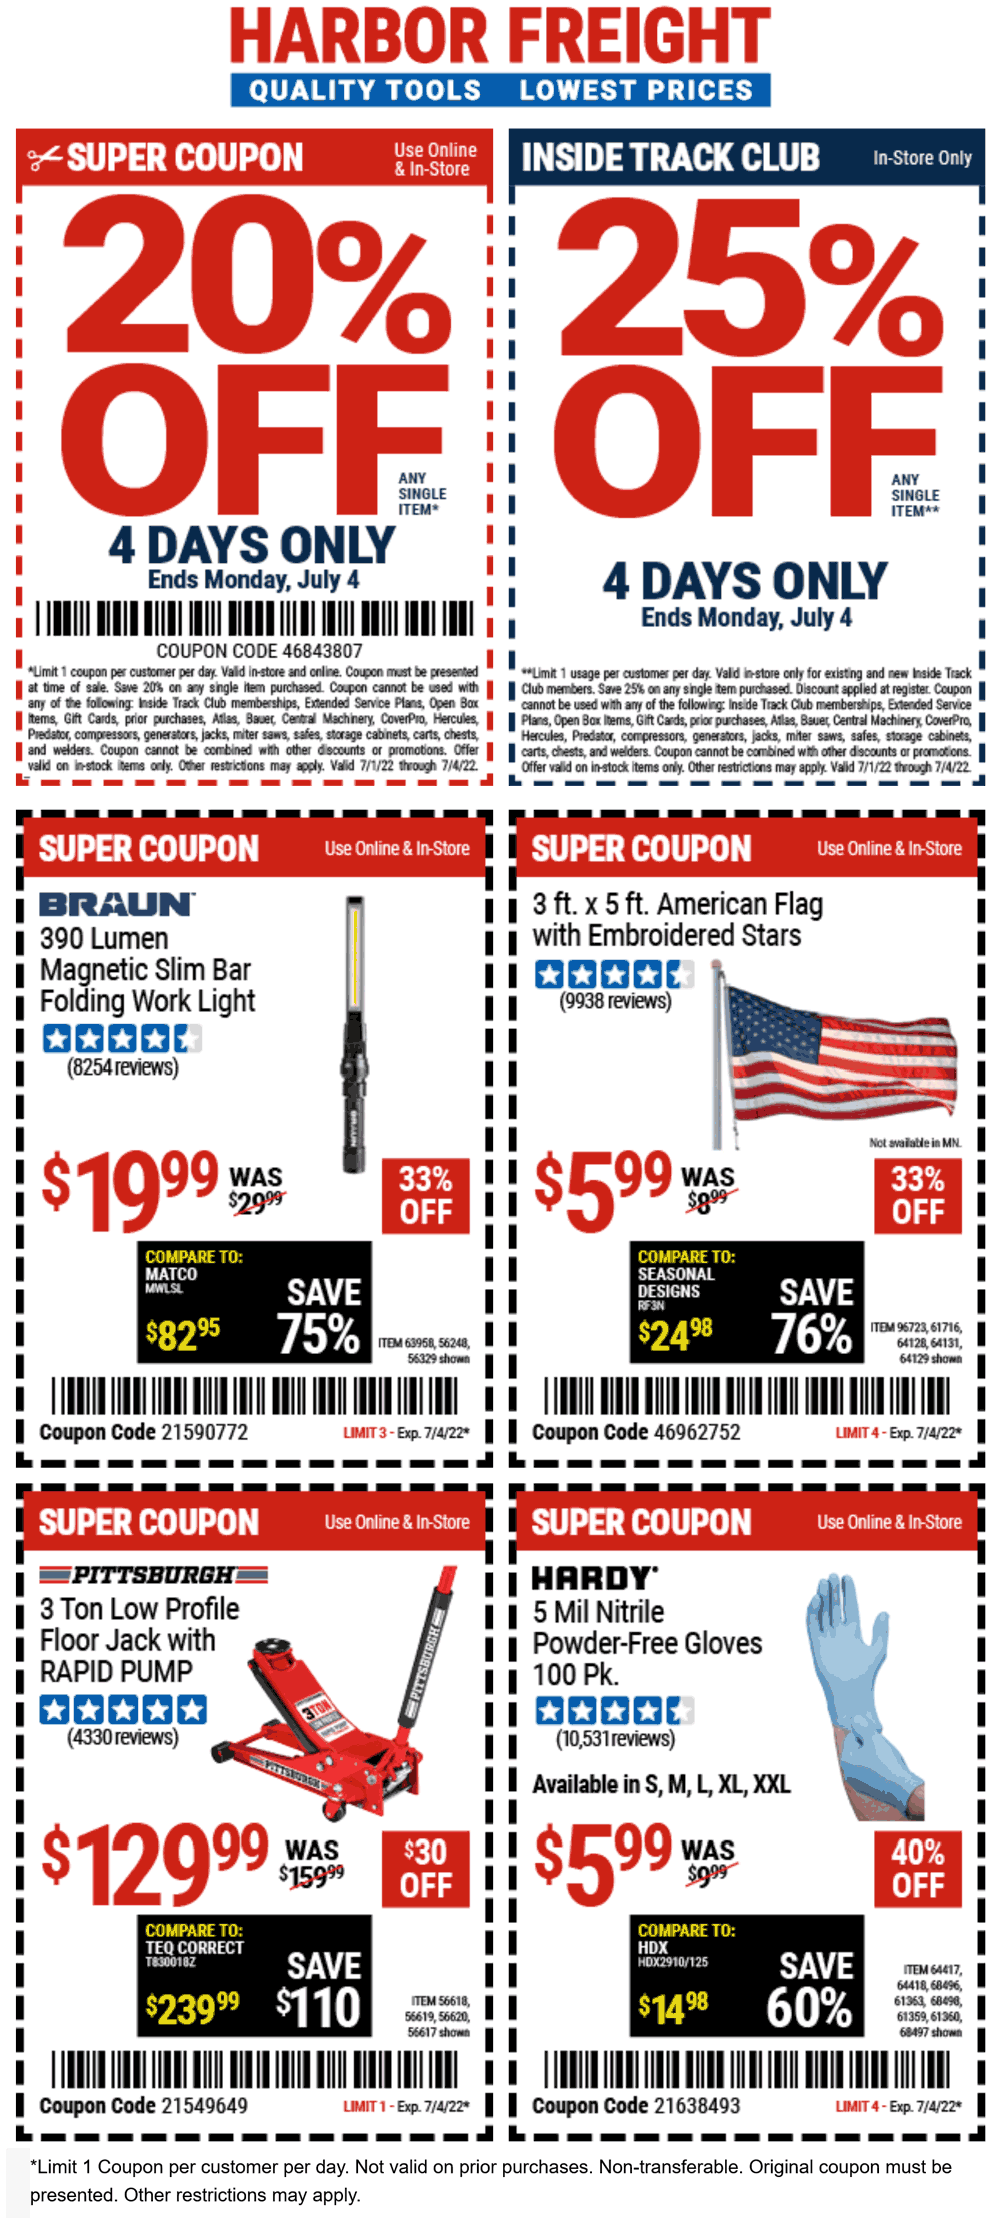 Harbor Freight stores Coupon  20-25% off a single item at Harbor Freight Tools #harborfreight 